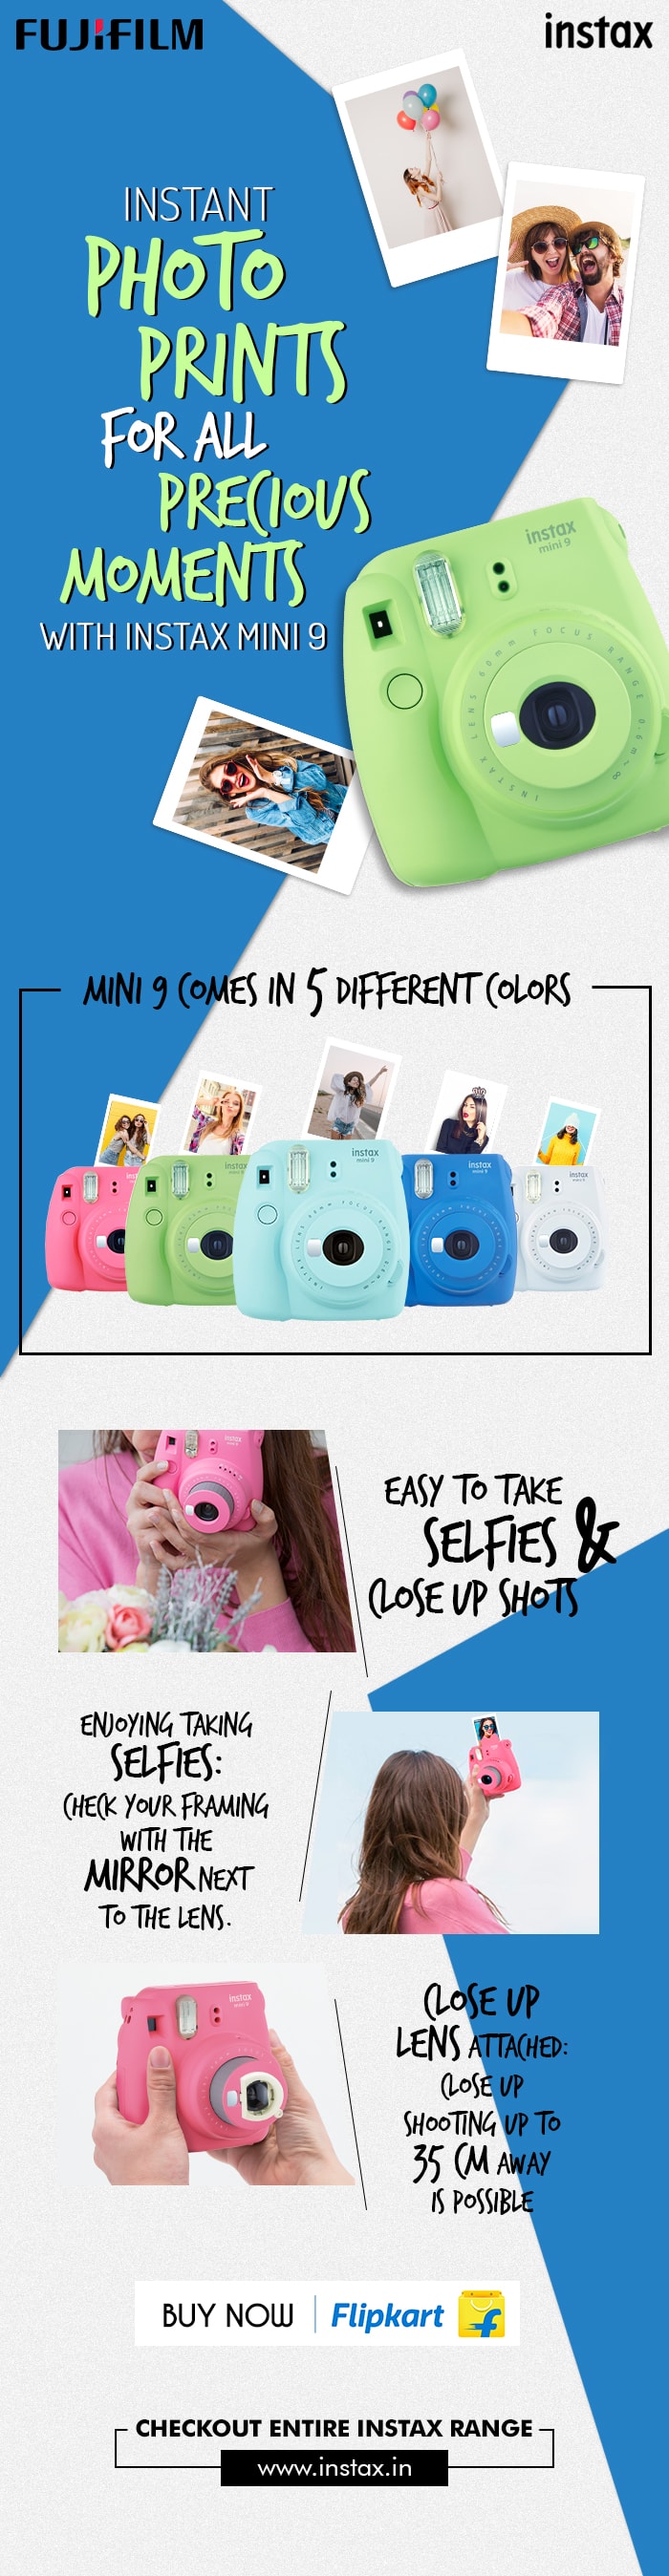 Instant-Photo-Prints-for-all-precious-moments-with-Instax-Mini-9